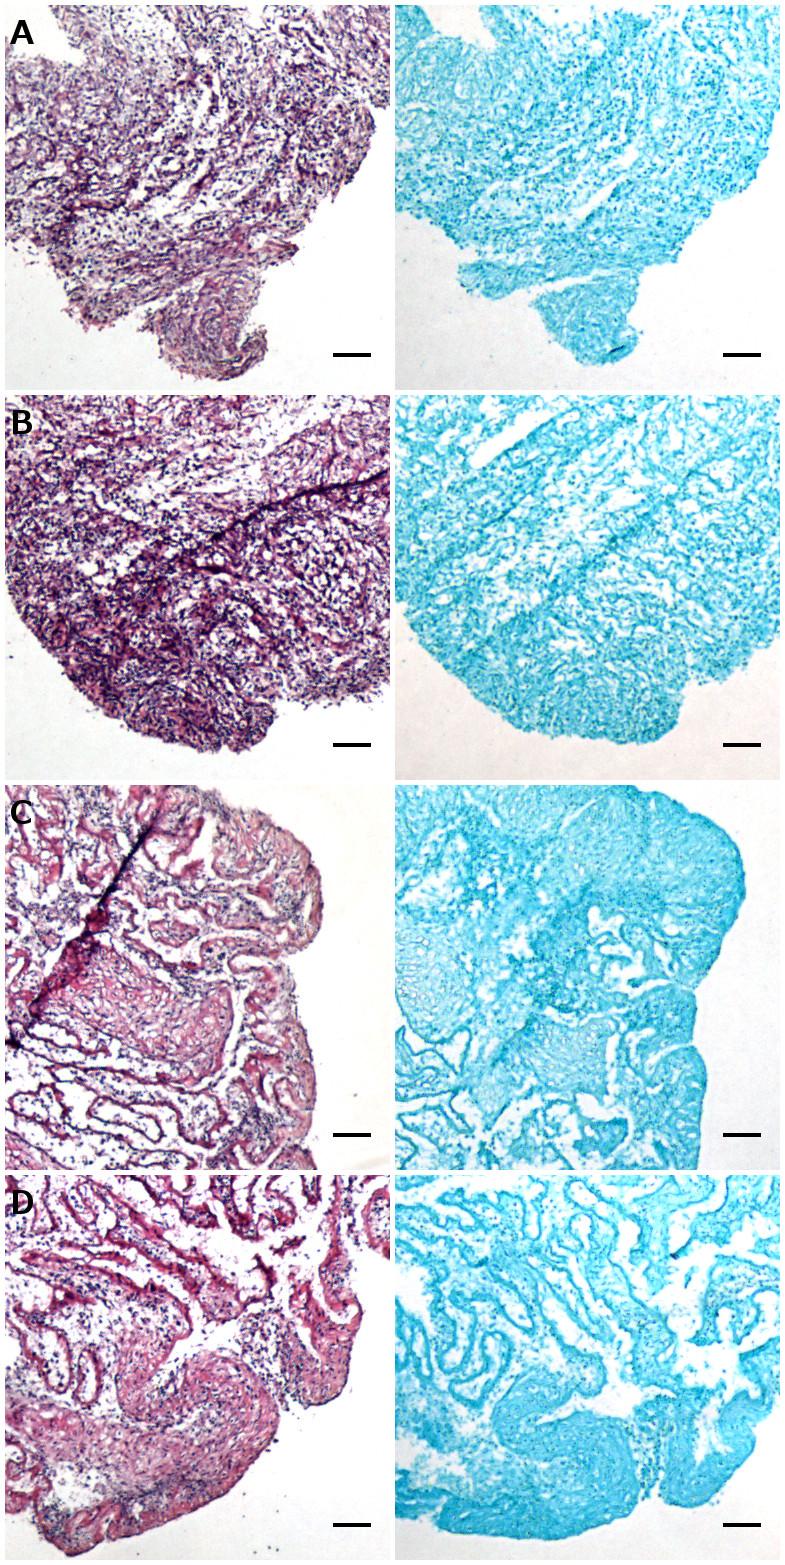 Figure 3.14: Donor 6 SF MPC constructs stained with H&E (left) and Alcian blue (right).